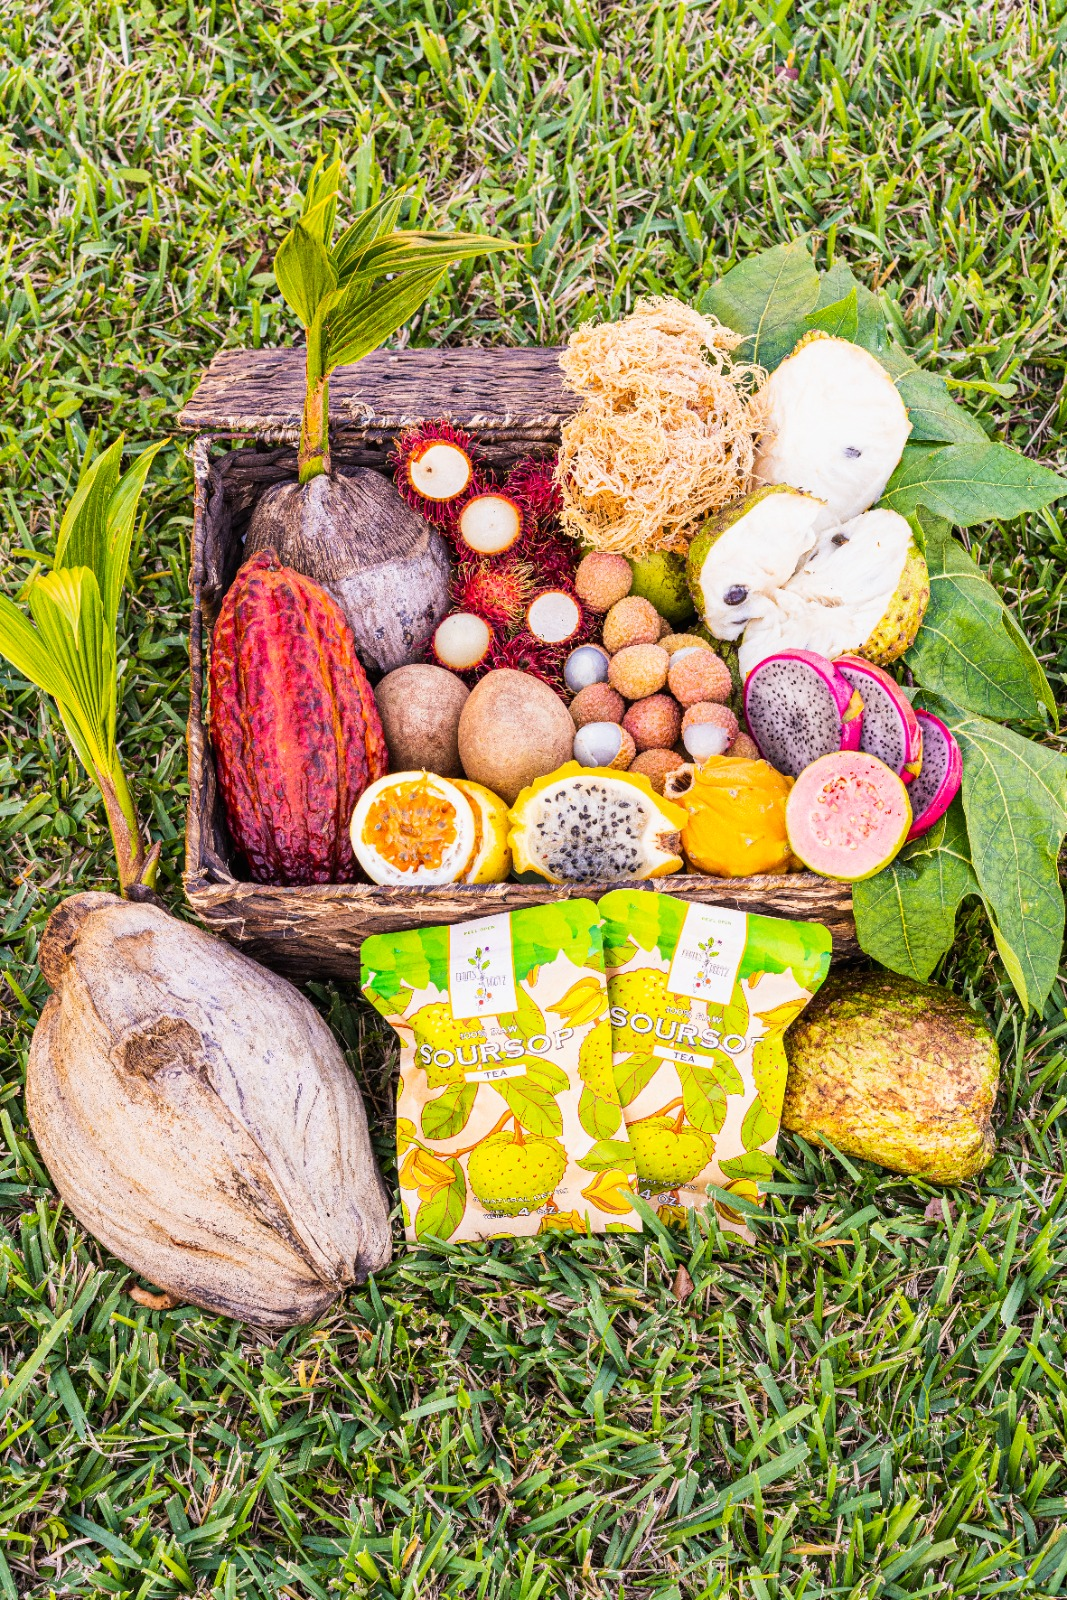 South Florida Based Company, Fruits N Rootz, Touted As The Largest Online Retailer Of Tropical Fruits In The United States